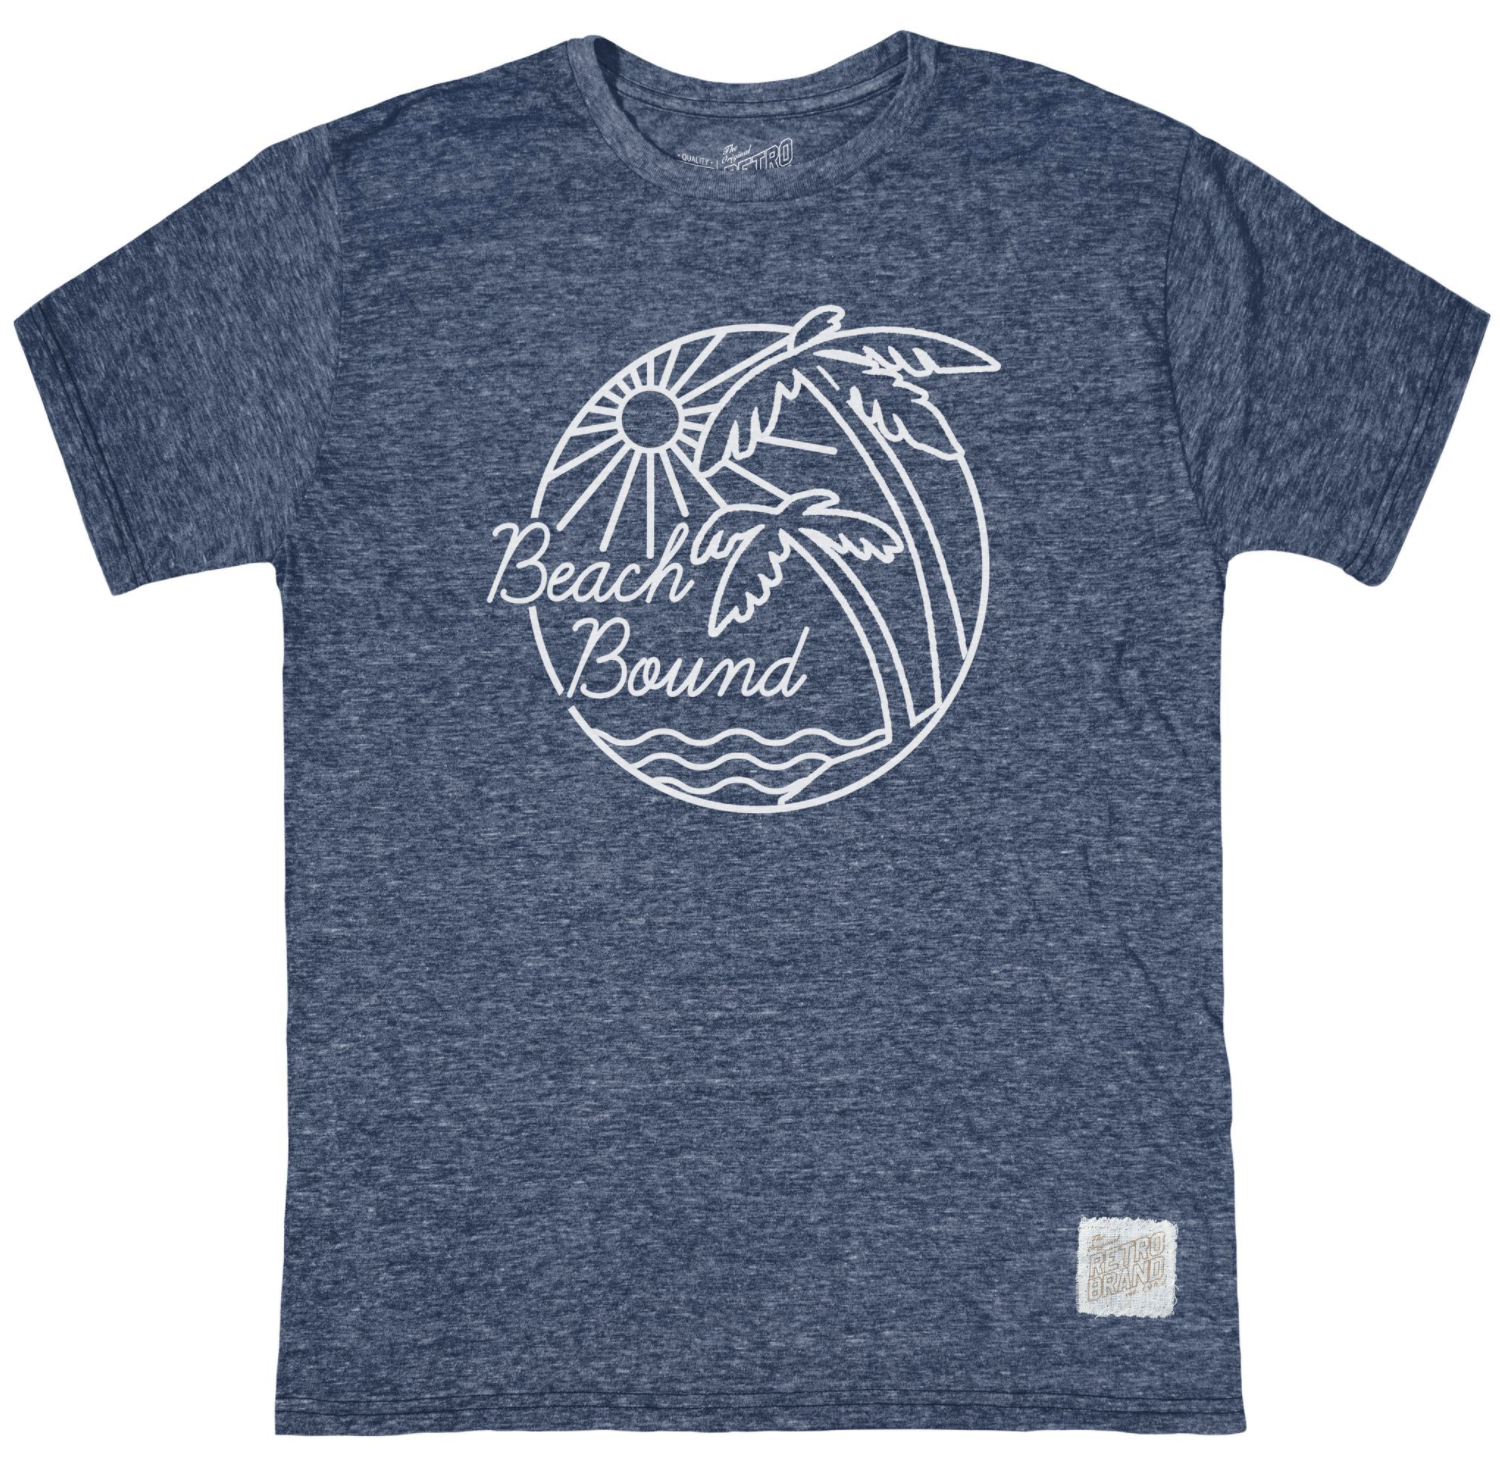 Beach Bound graphic featuring palm trees, sun, and surf all in white on our tri-blend unisex tree in streaky blue